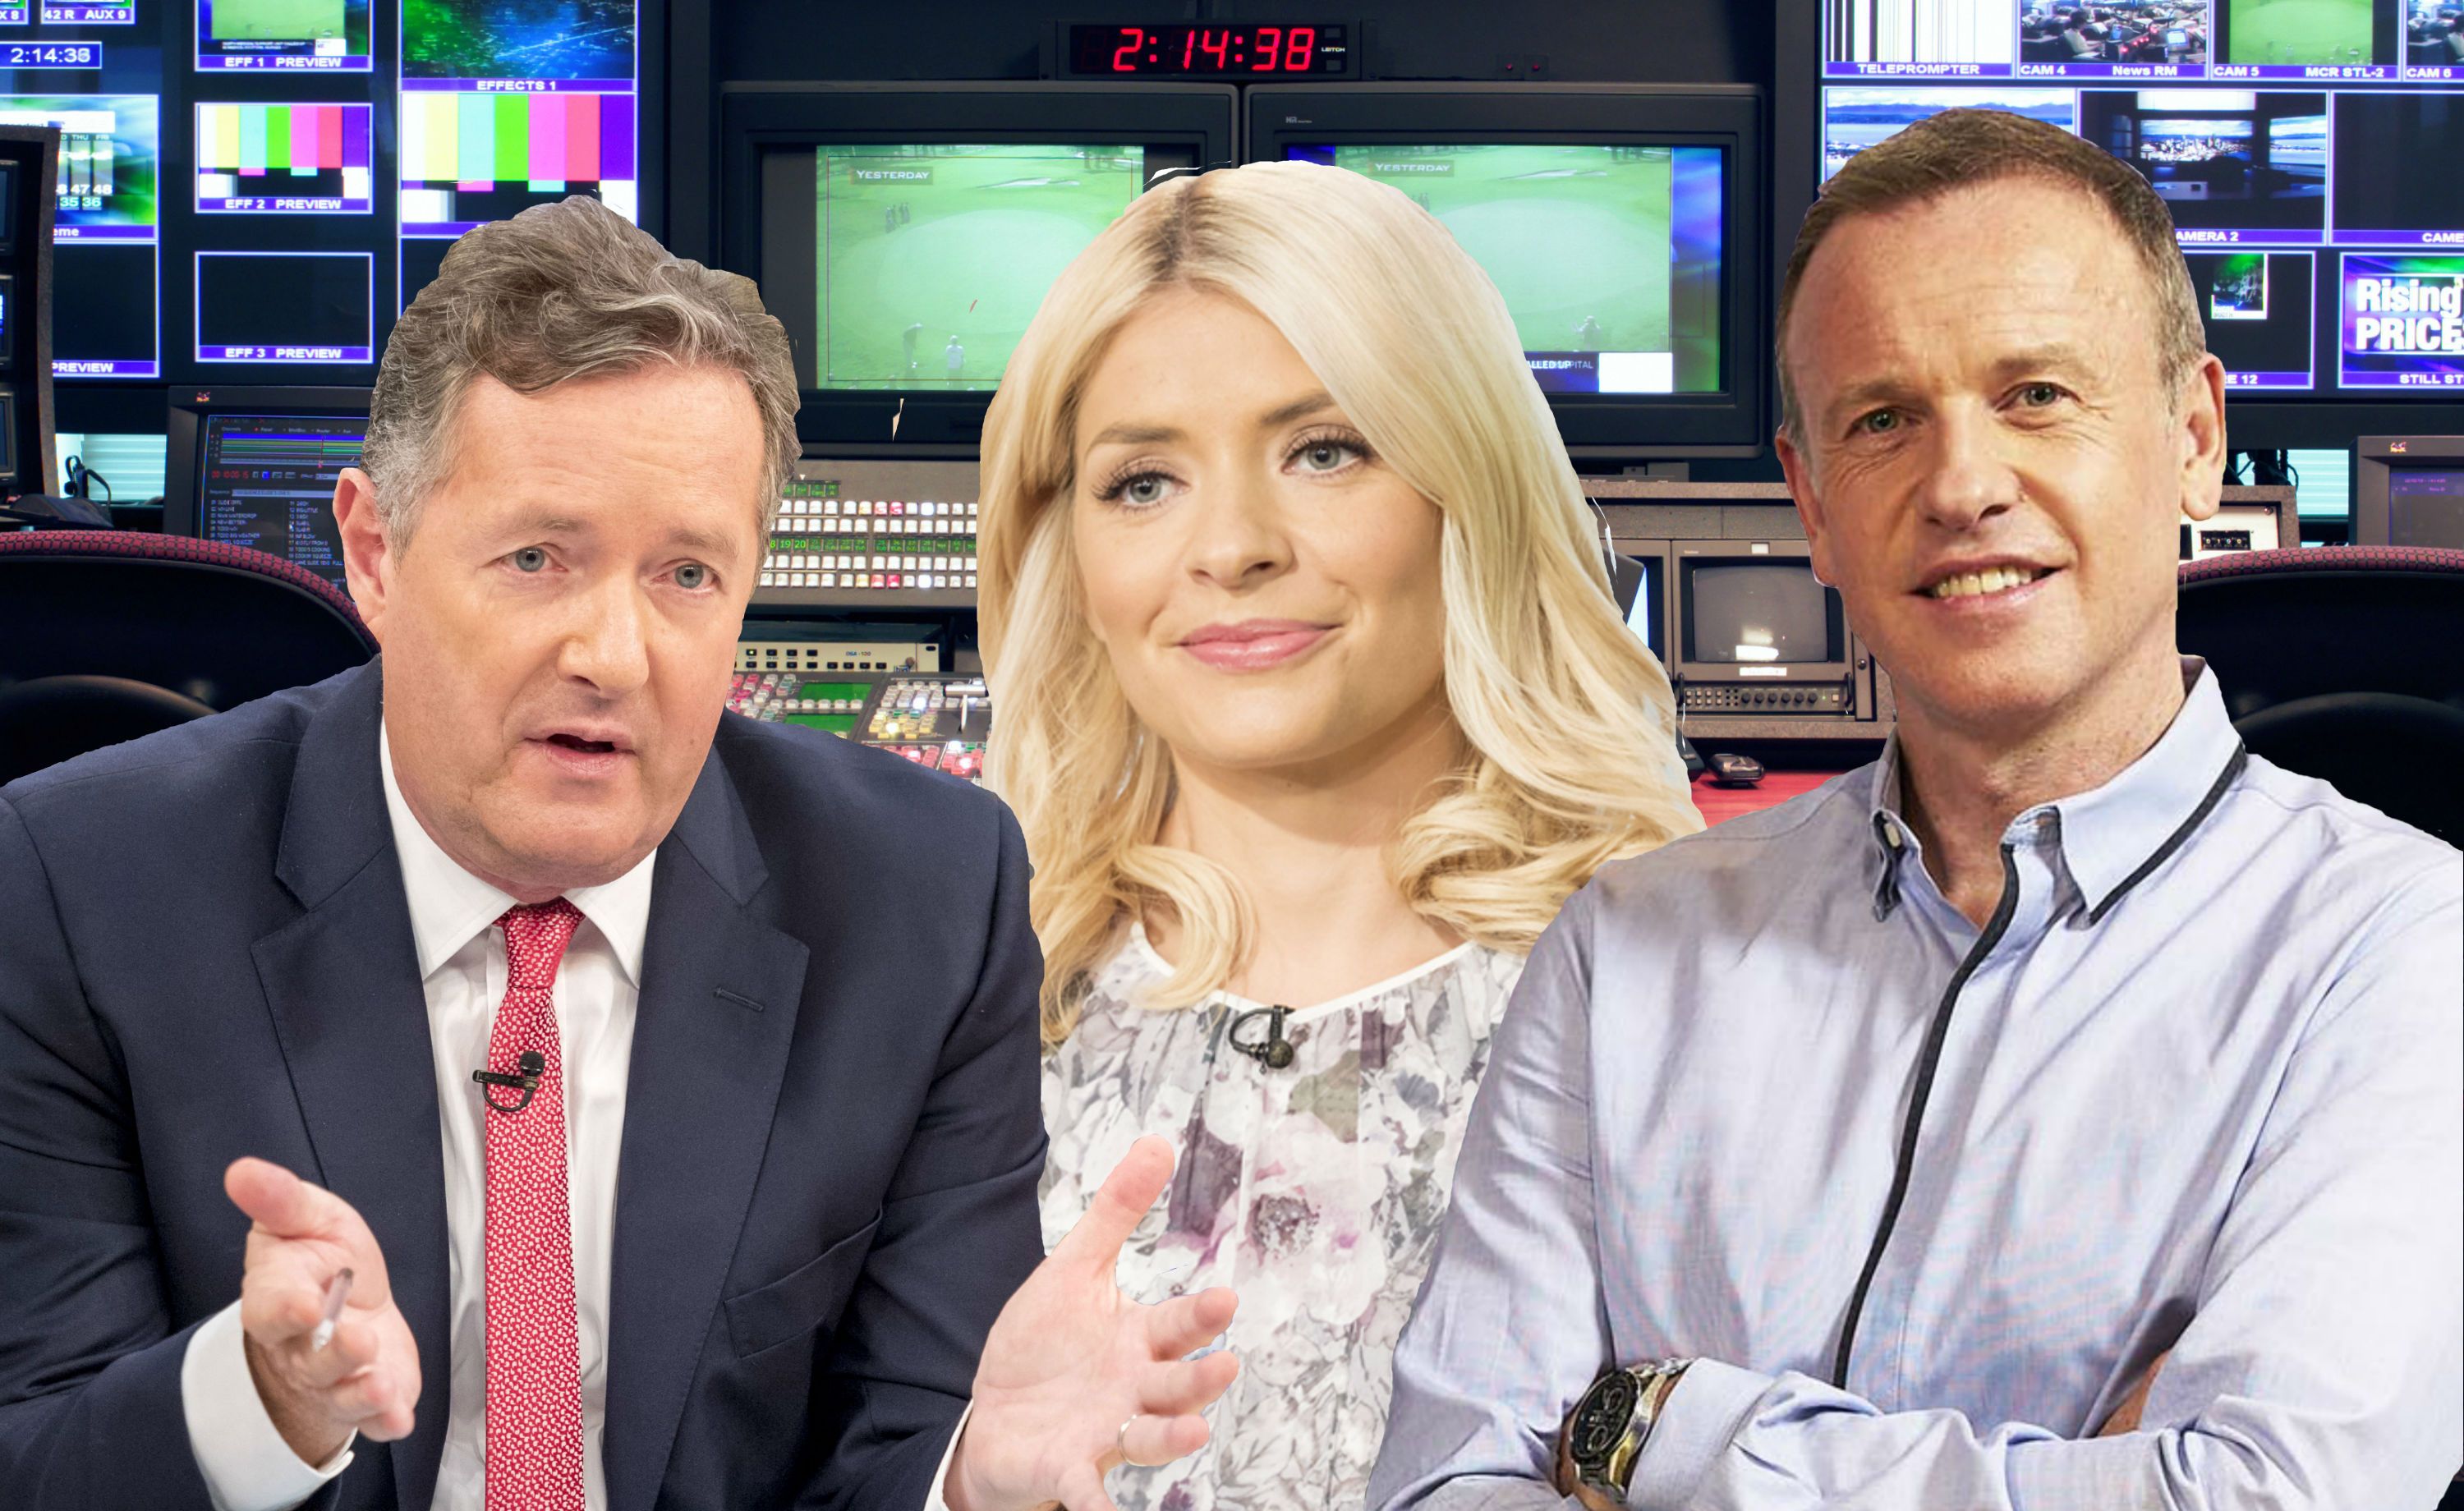 9 times fed-up TV presenters just had enough and cut short live interviews